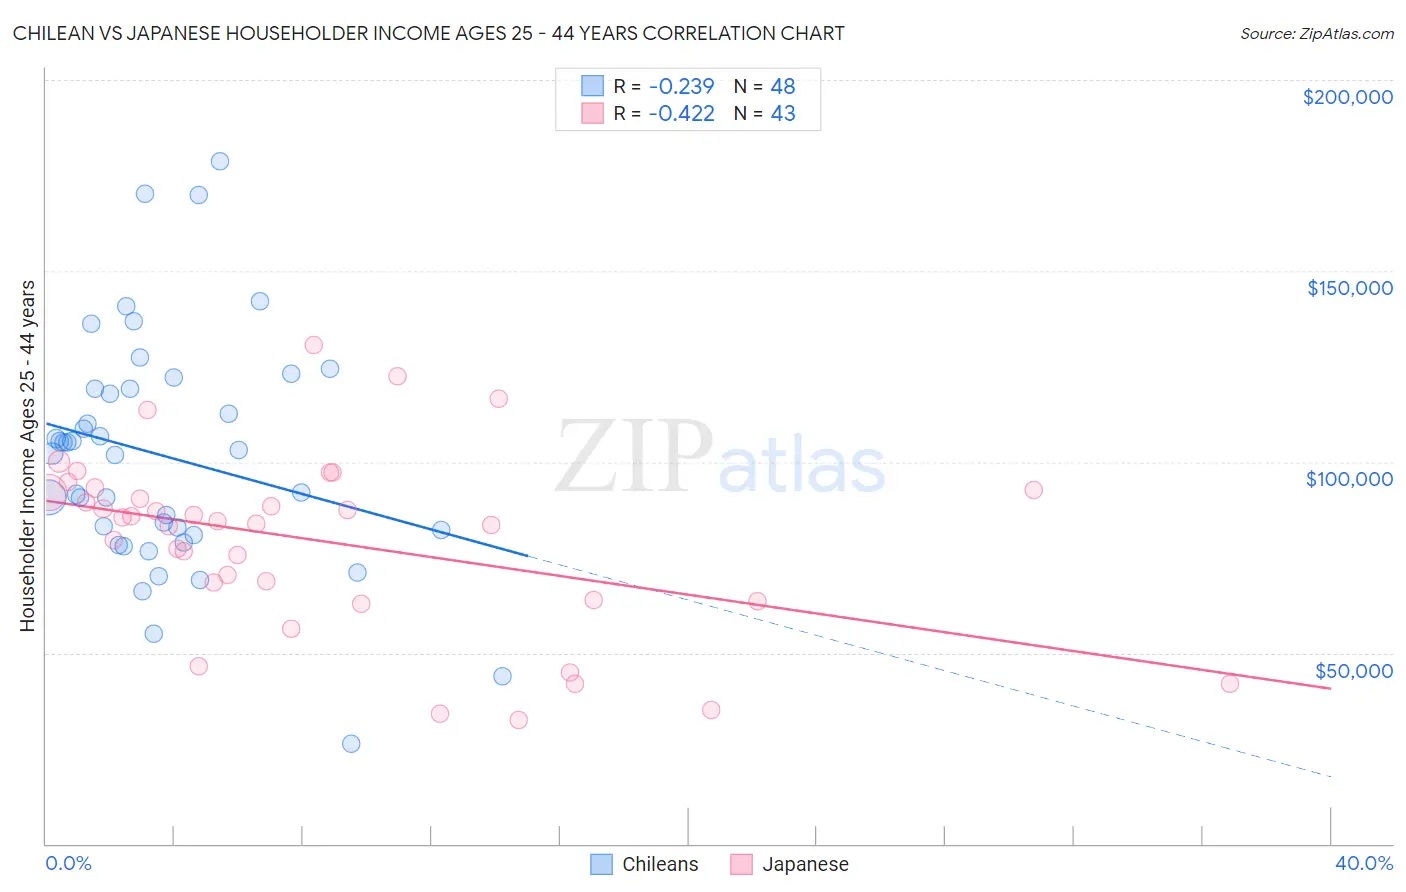 Chilean vs Japanese Householder Income Ages 25 - 44 years